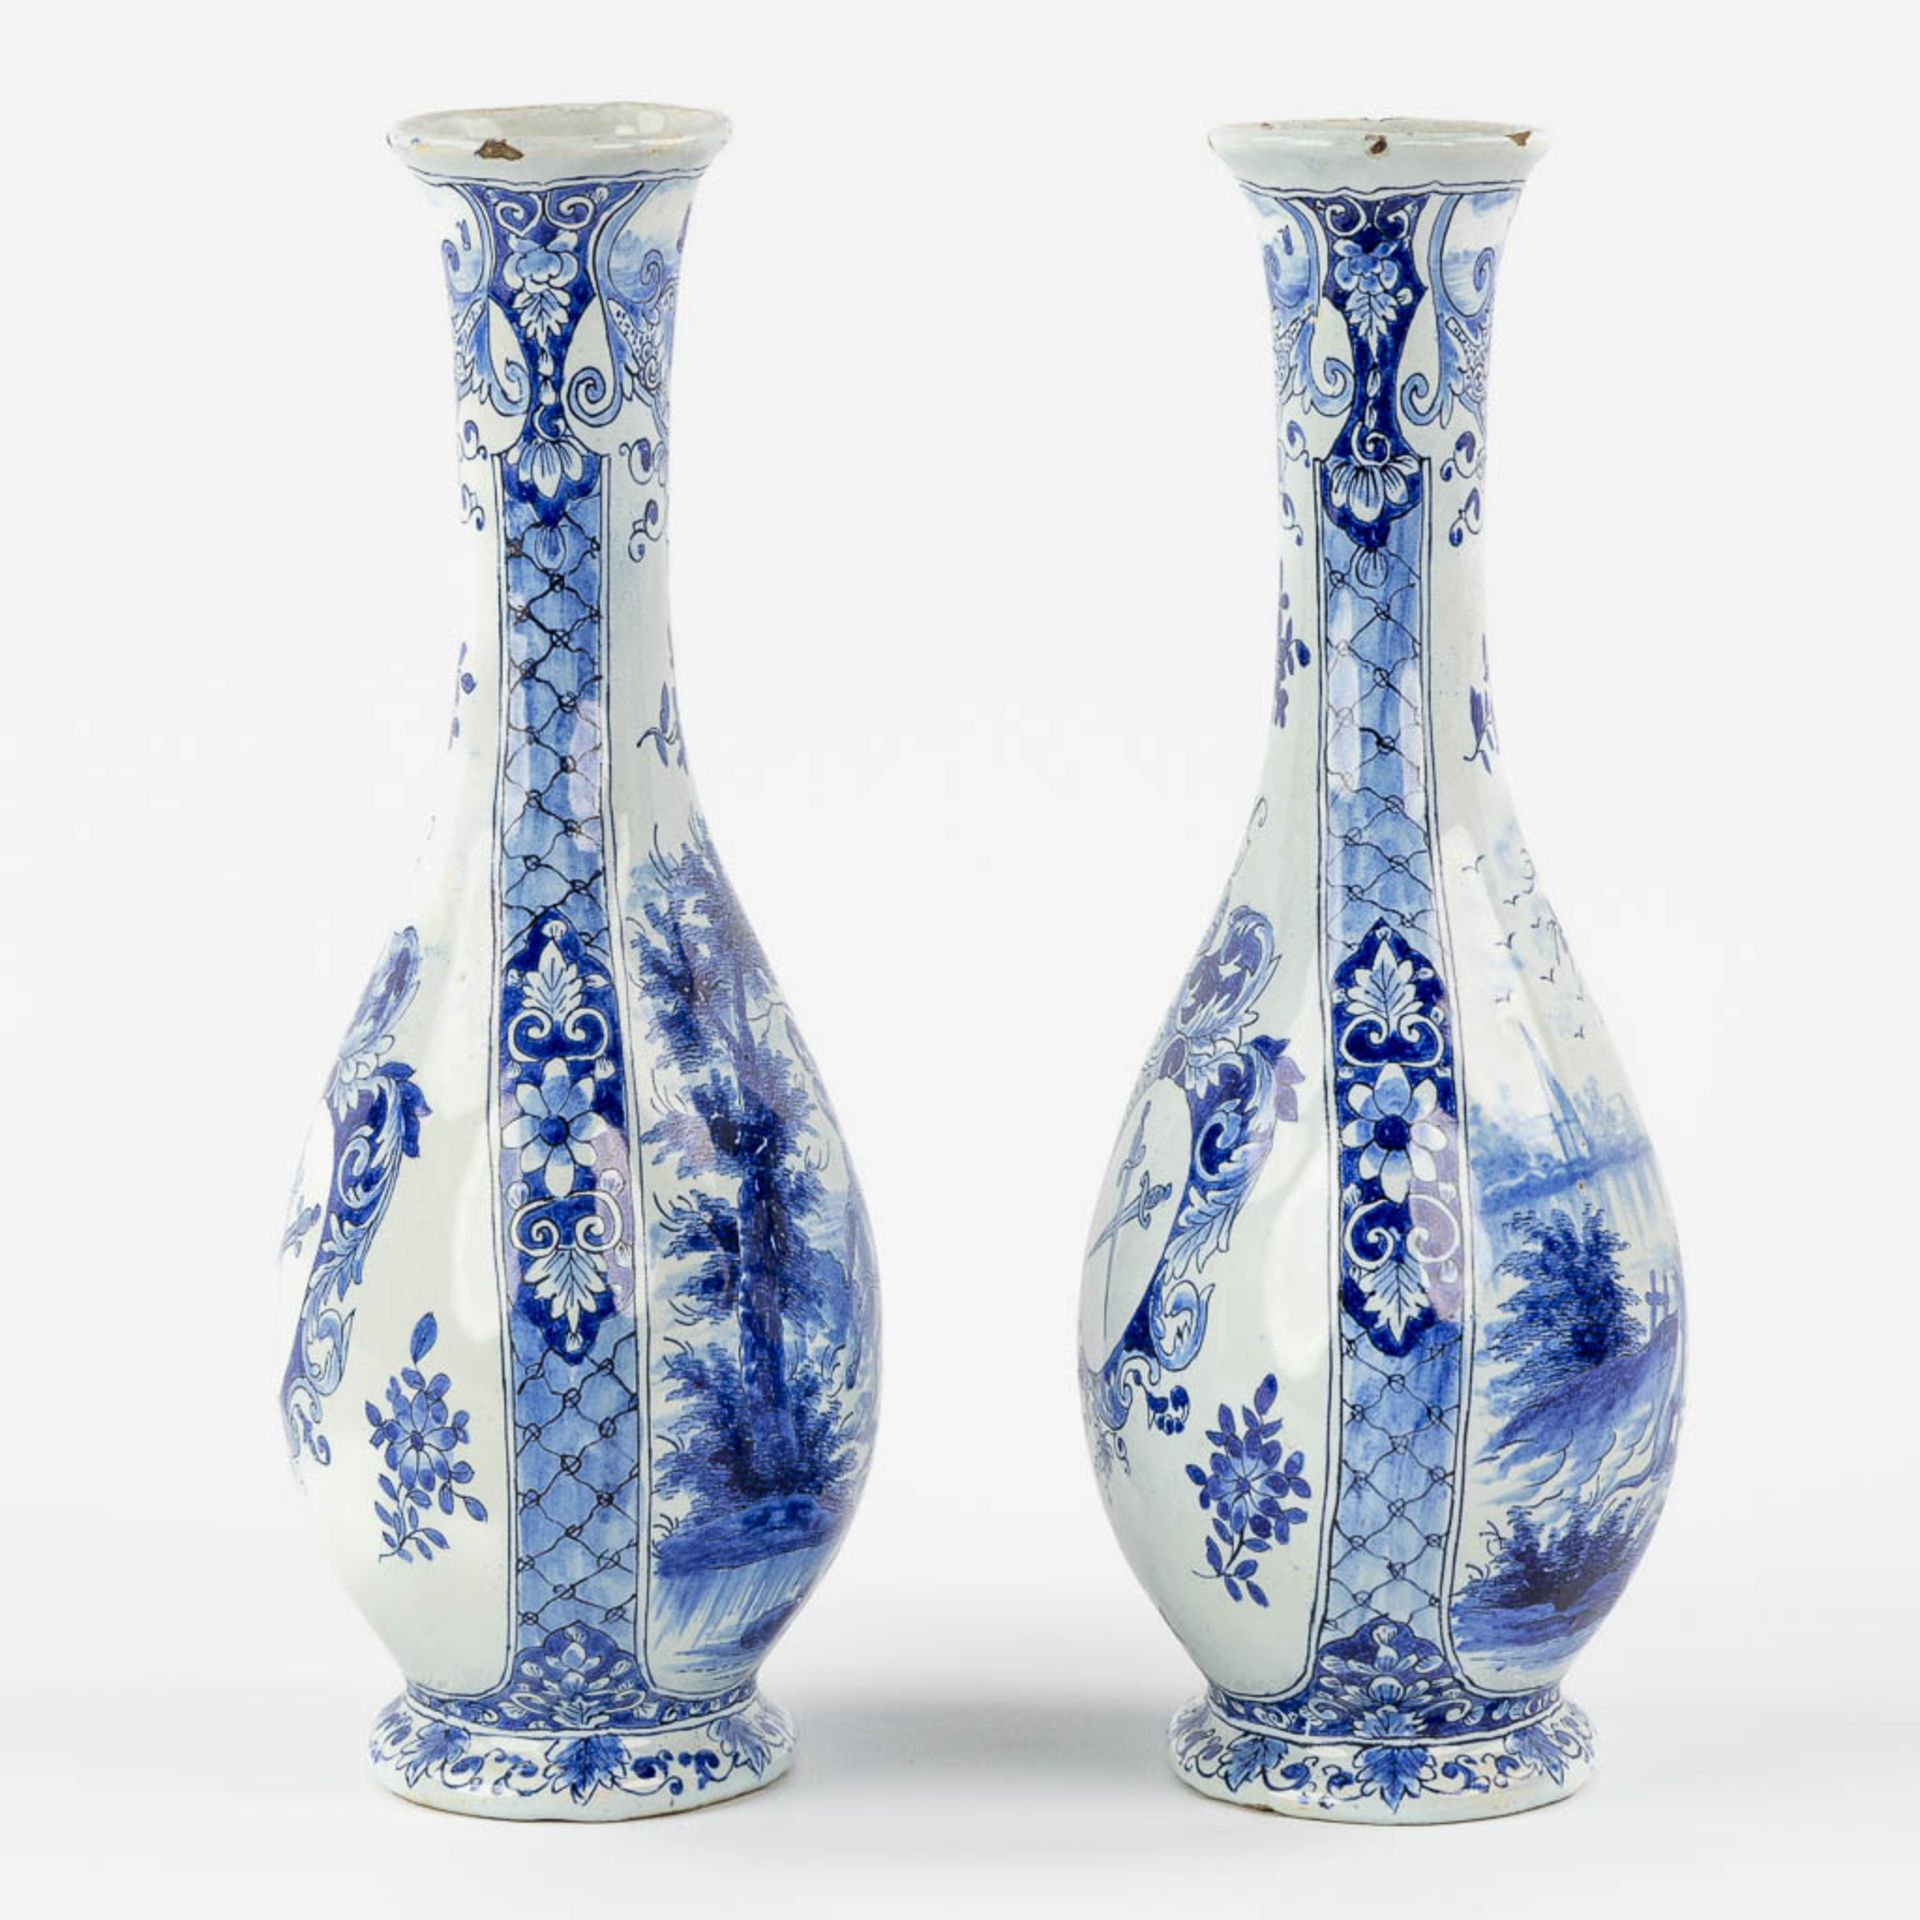 Geertrui Verstelle, Delft, a pair of vases with a landscape decor. Mid 18th C. (L:9 x W:14 x H:26,5 - Image 4 of 15